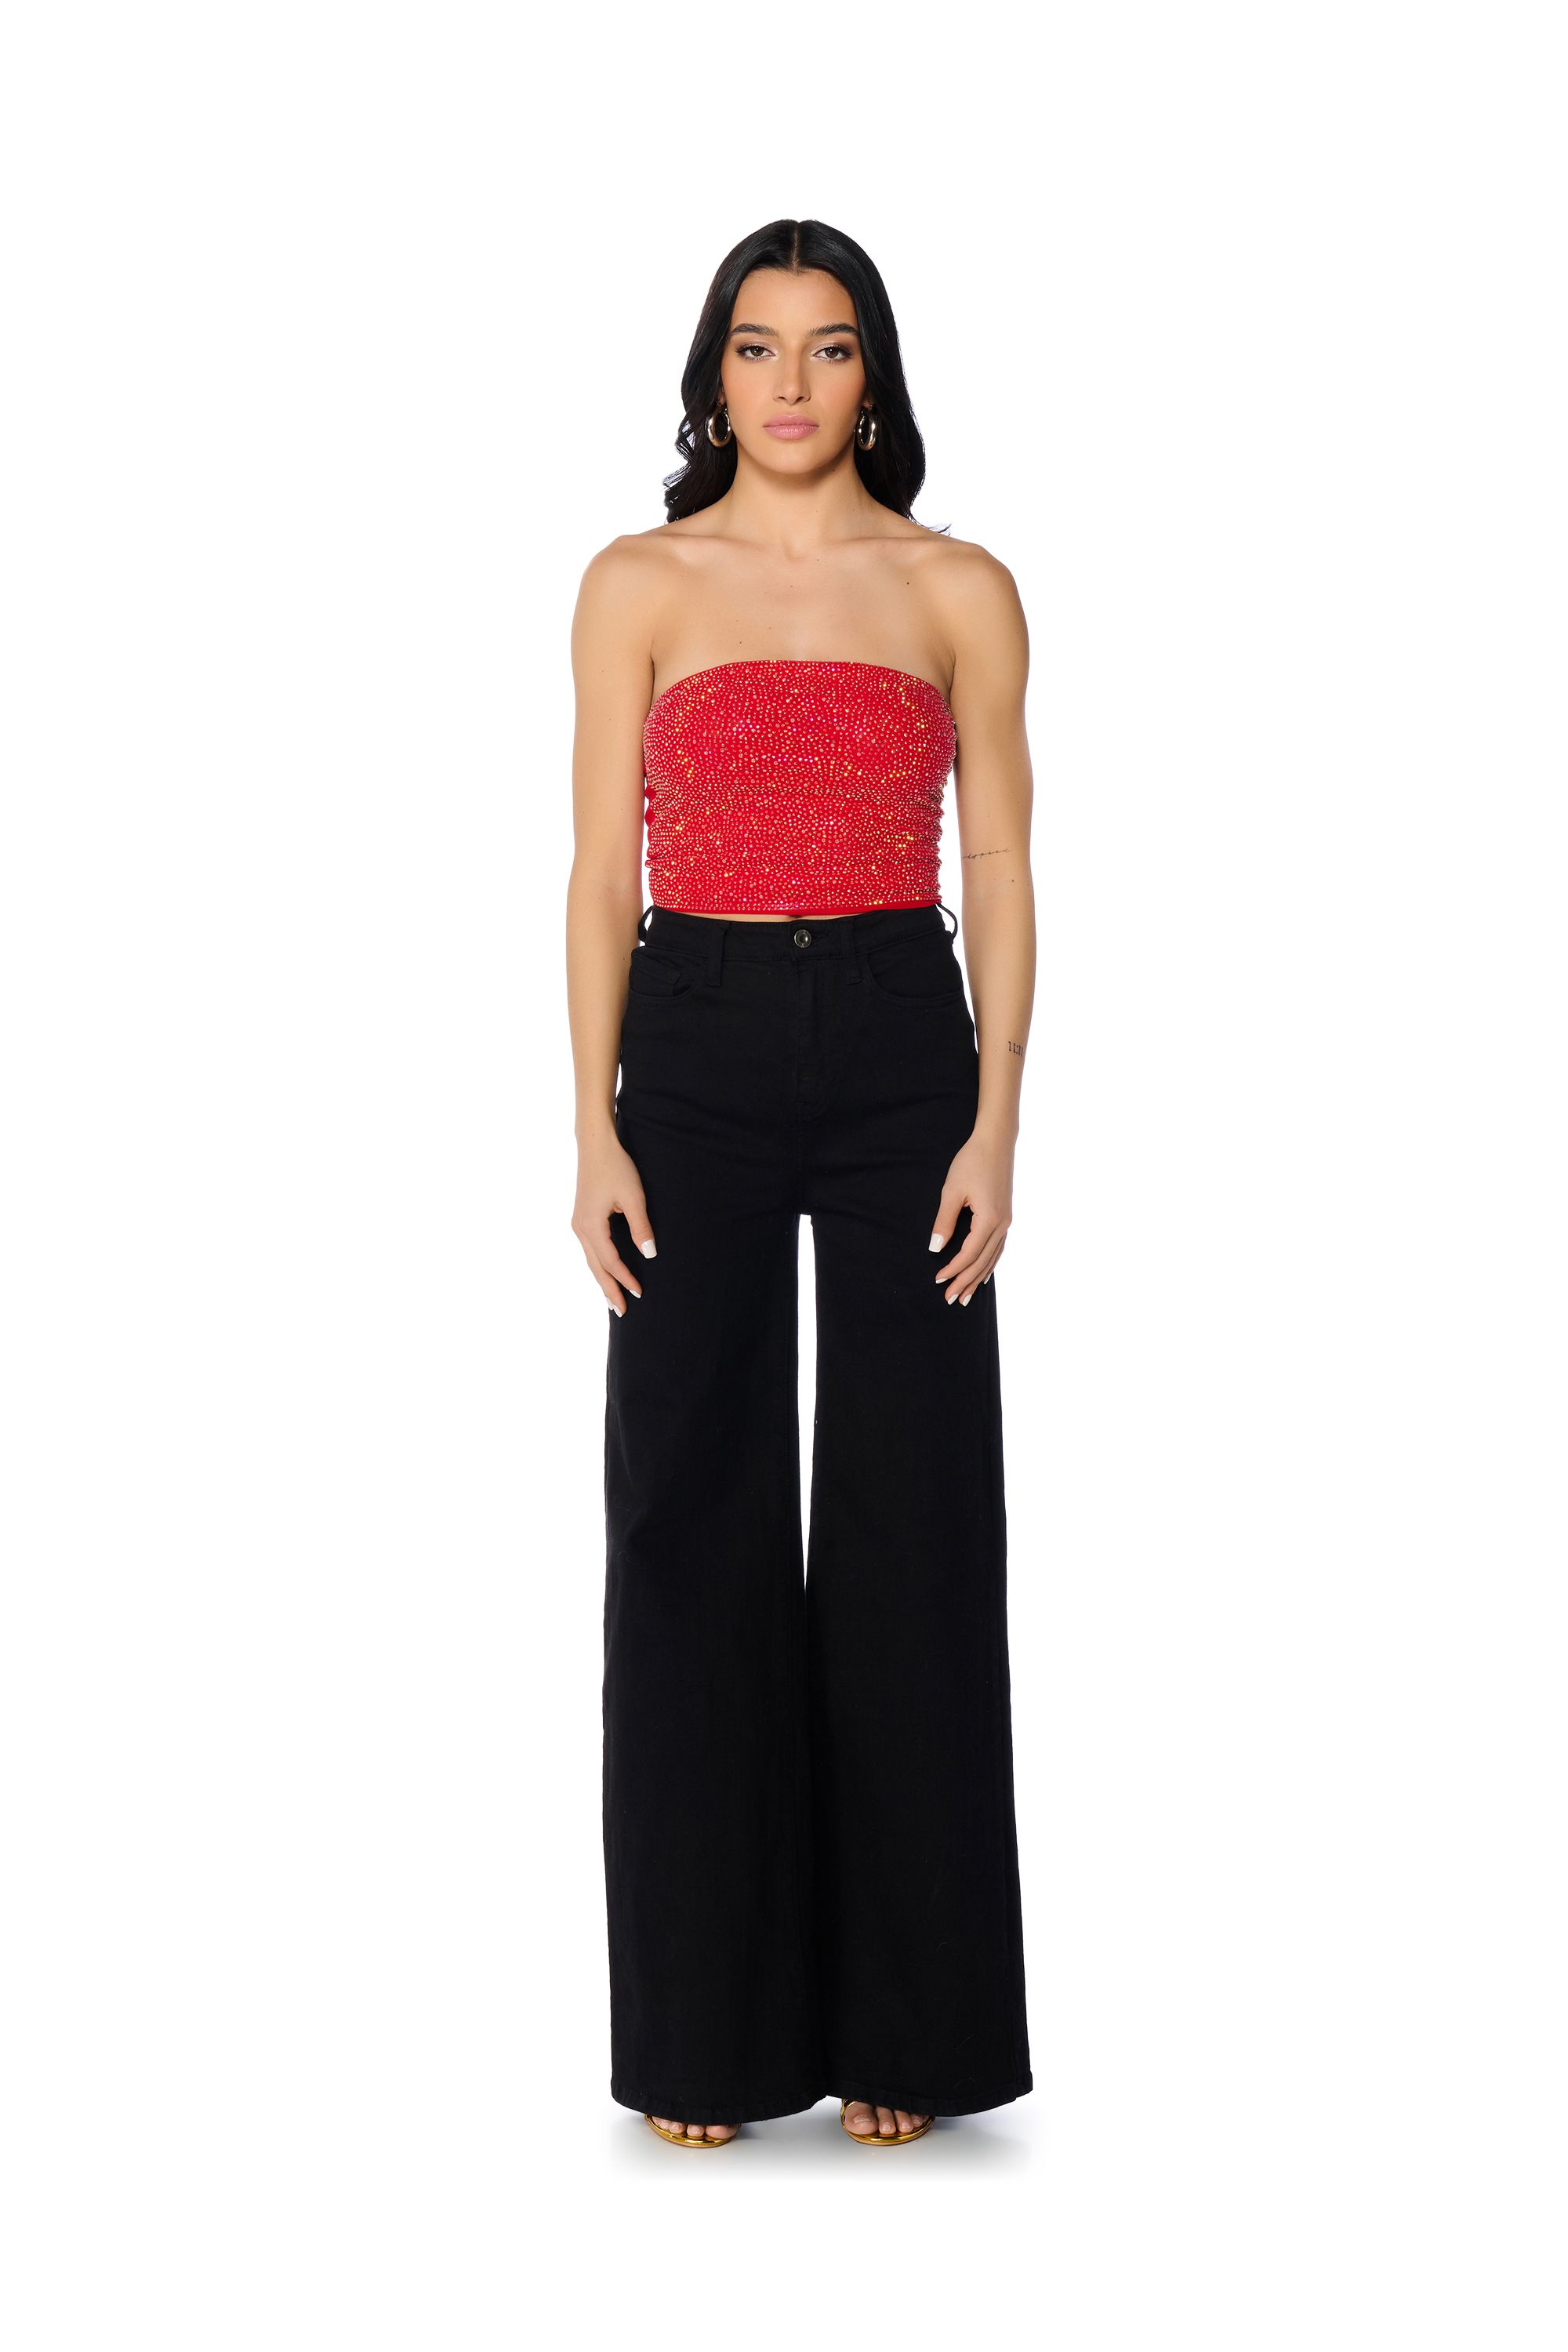 MATERIAL GIRL RHINESTONE EMBELLISHED TUBE TOP IN RED